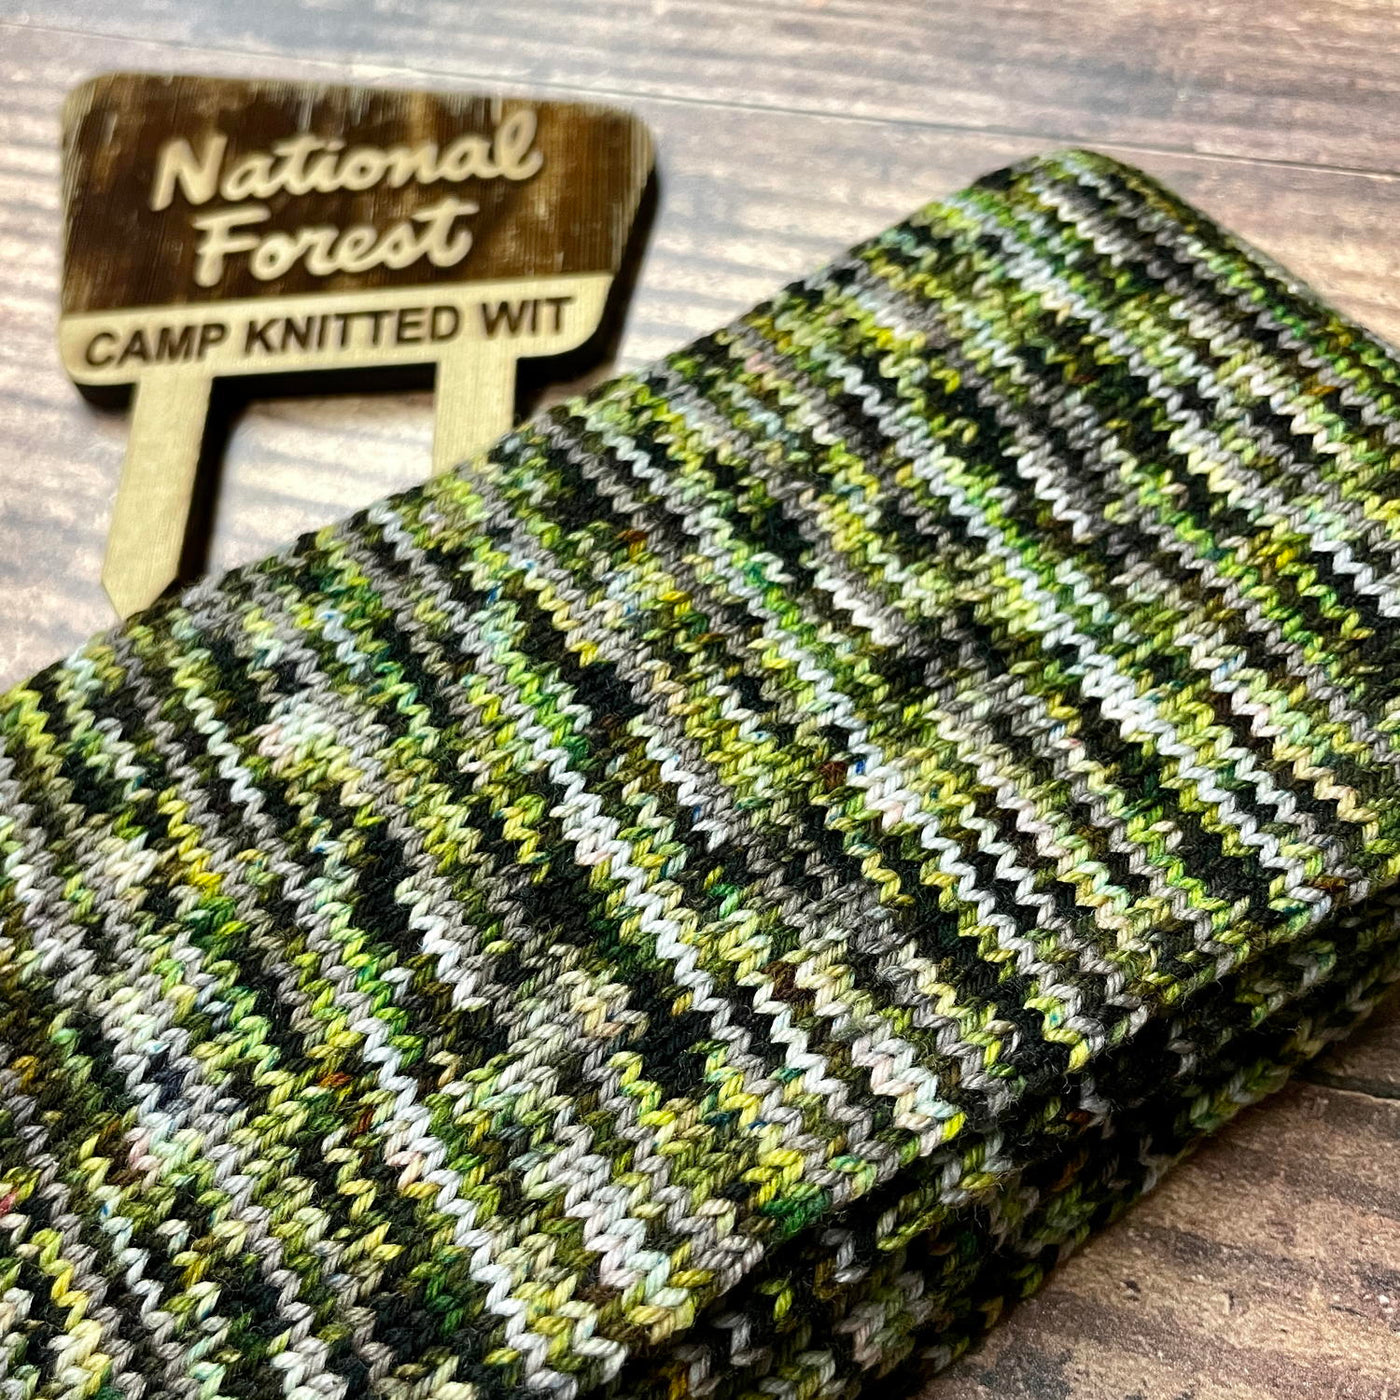 Knitted Wit -  Carver National Monument